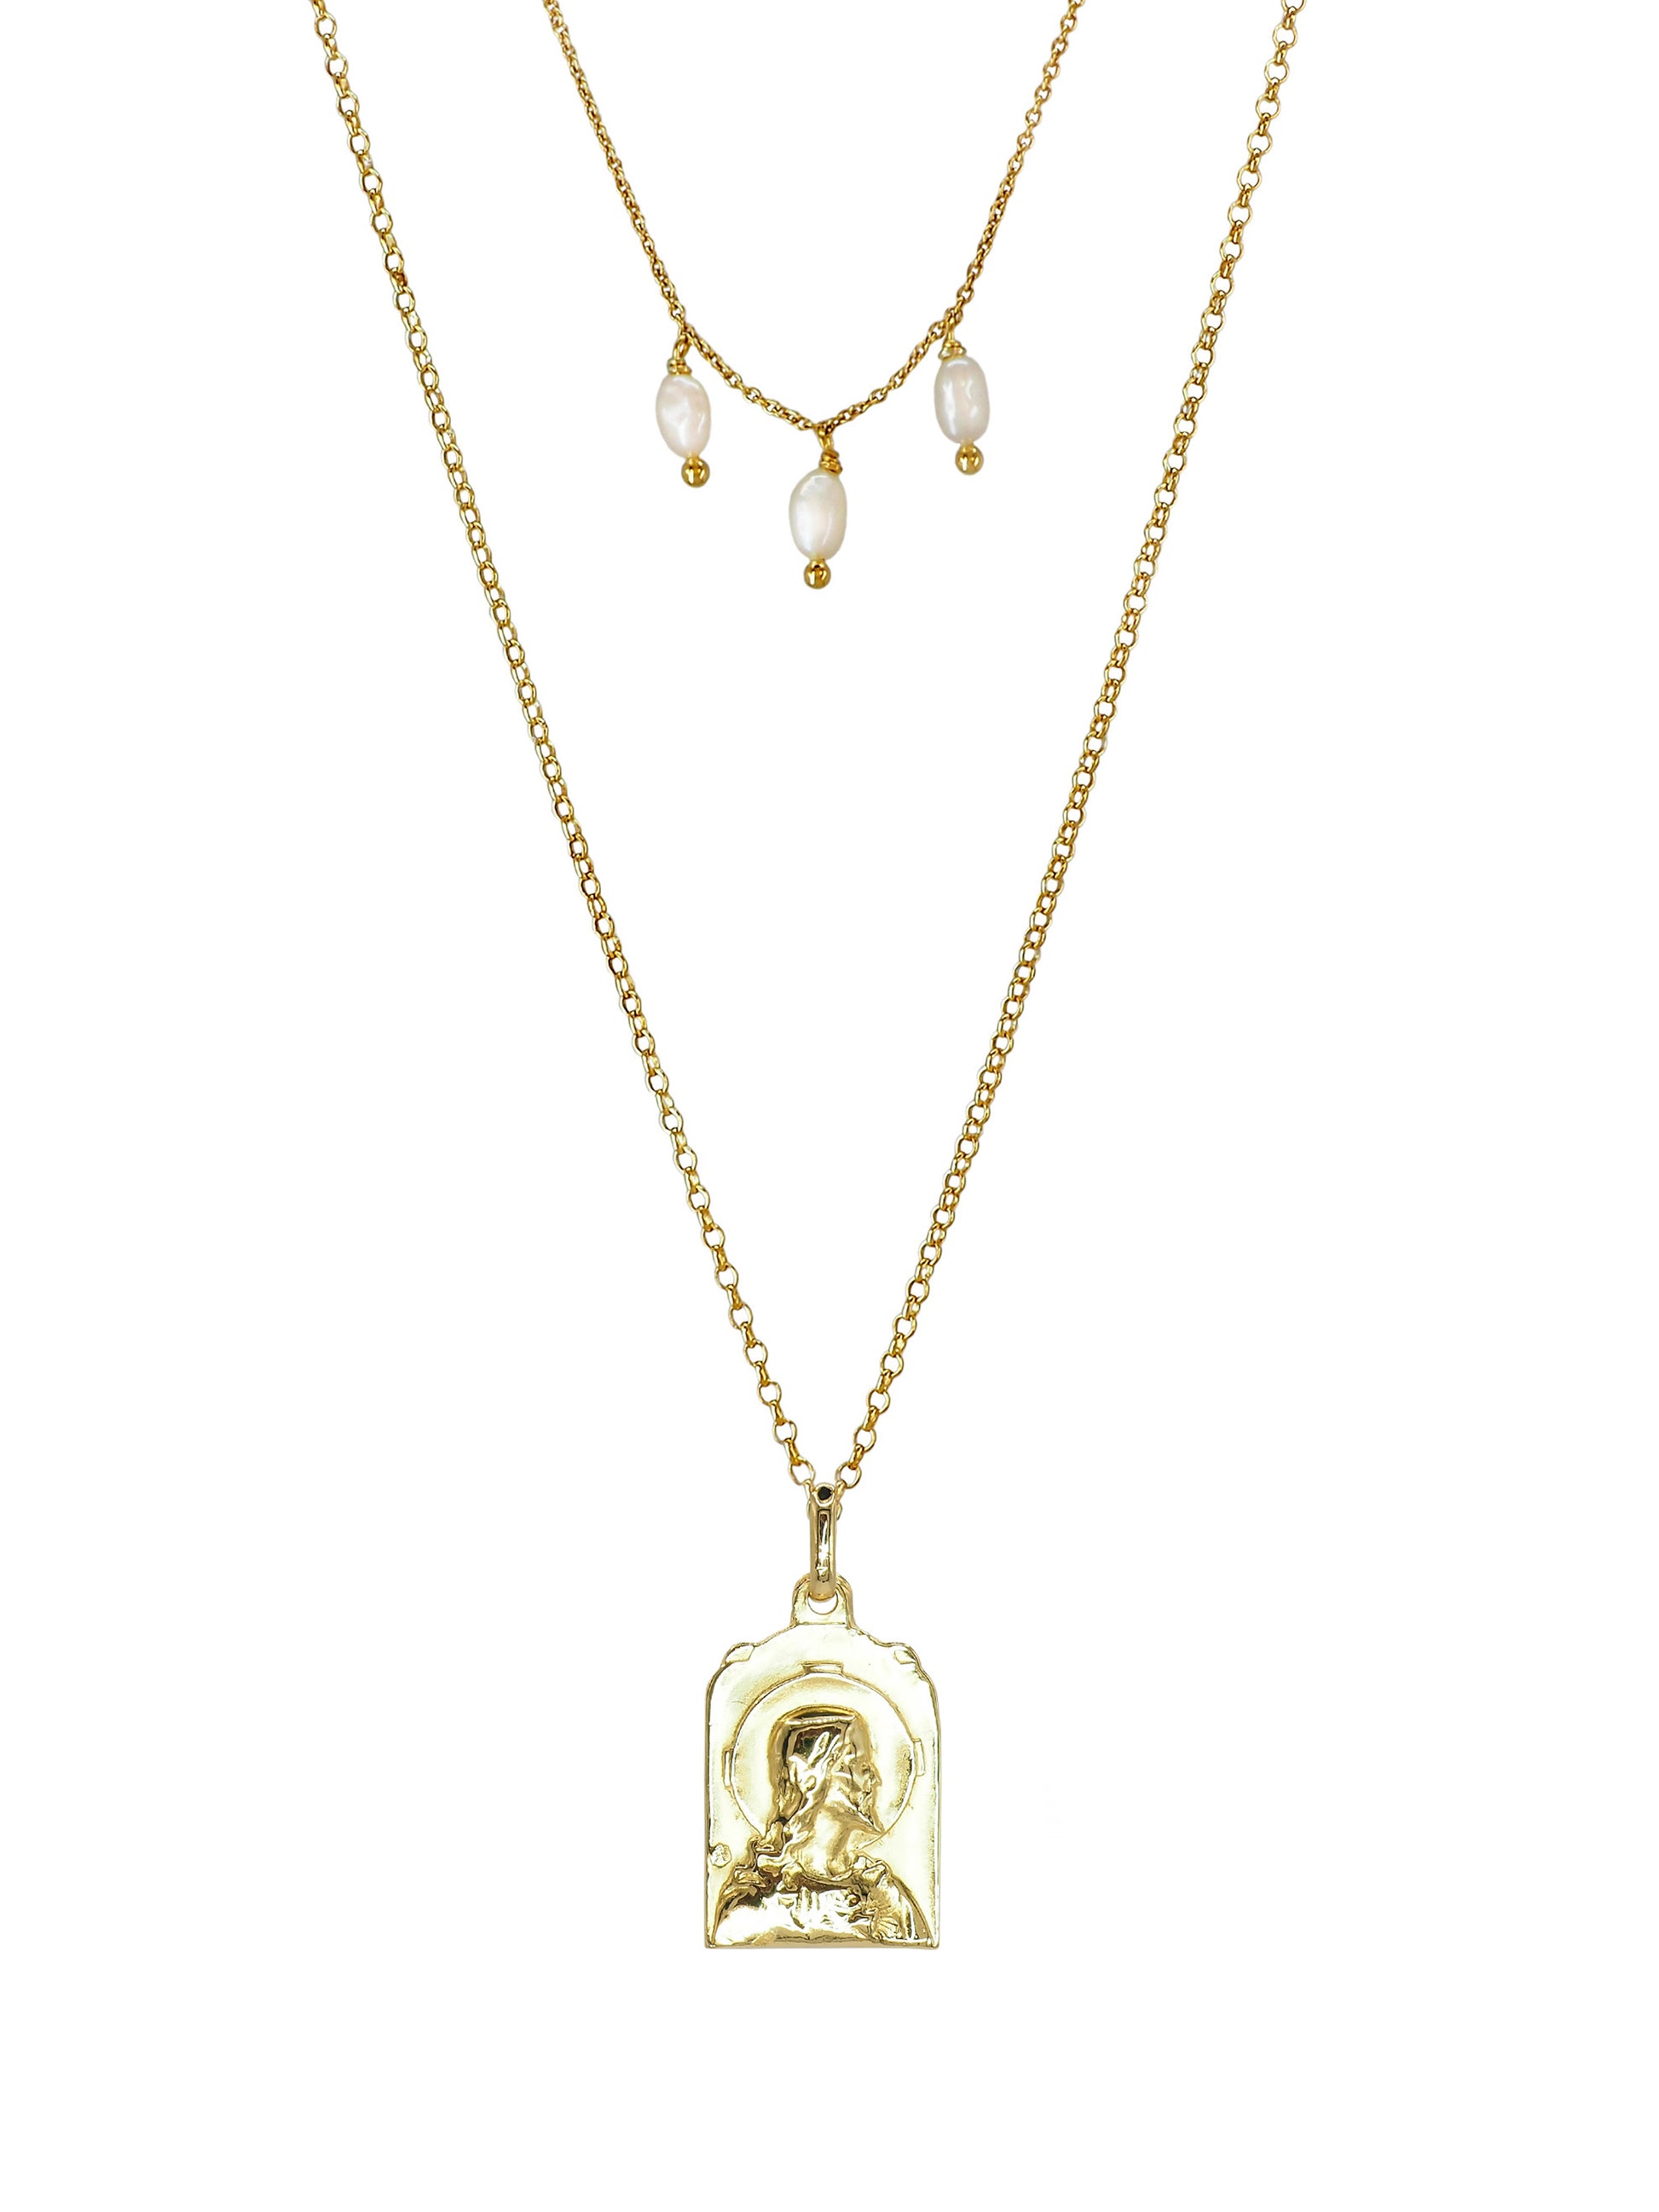 Holy Carmen Necklace. Gold plated Sterling Silver. Freshwater pearls. One of a Kind.